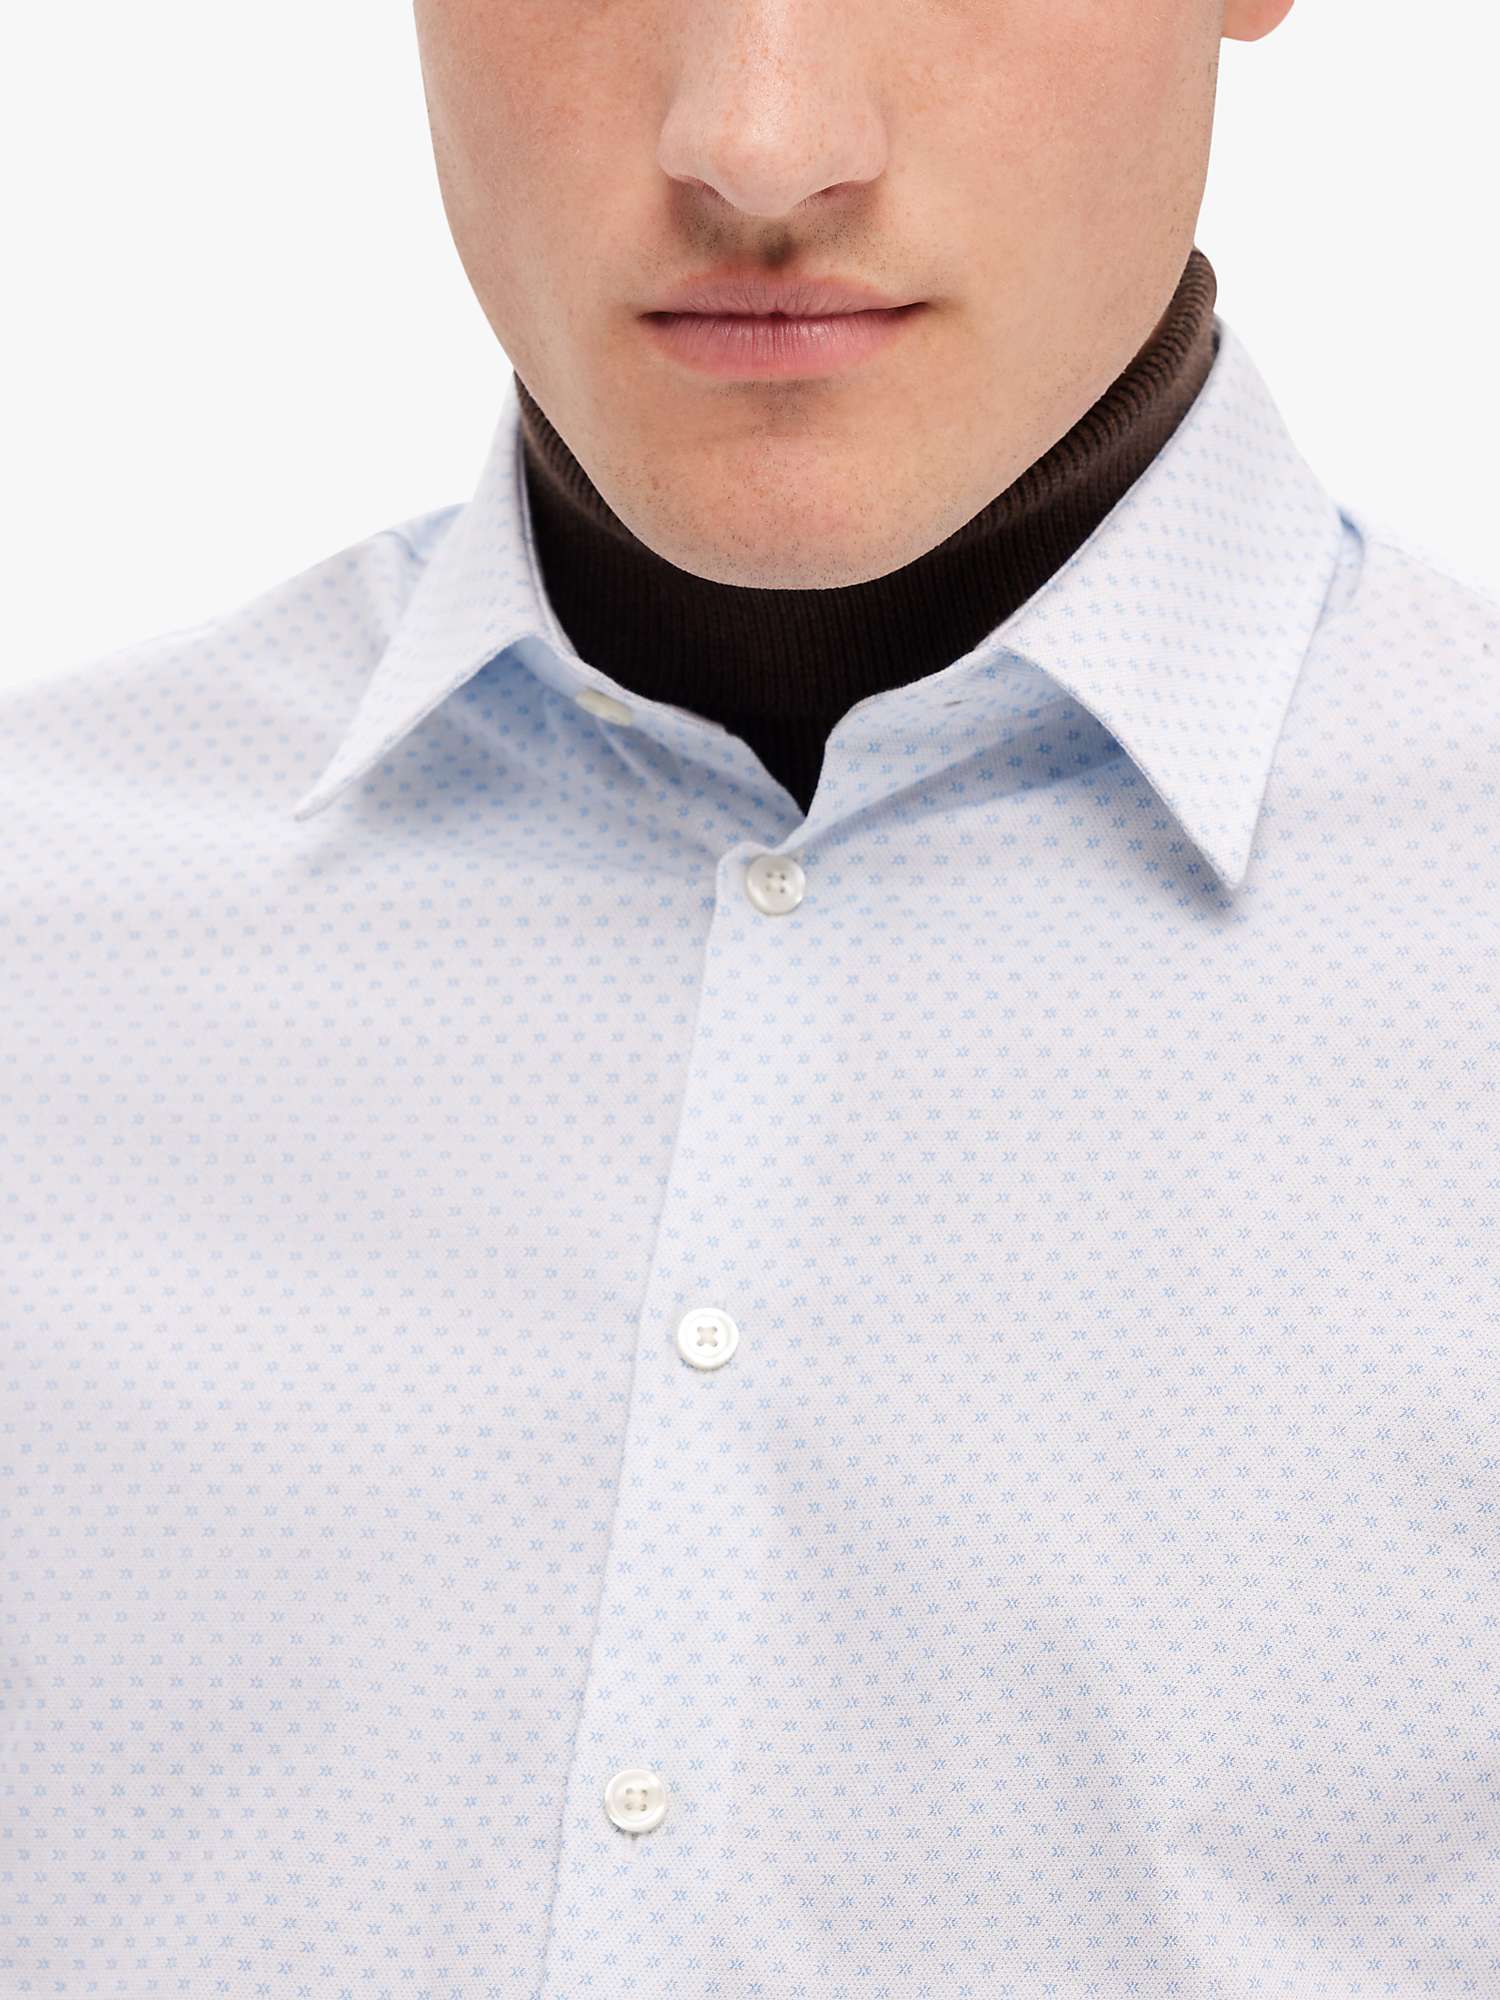 Buy SELECTED HOMME Formal Long Sleeve Shirt, White Online at johnlewis.com